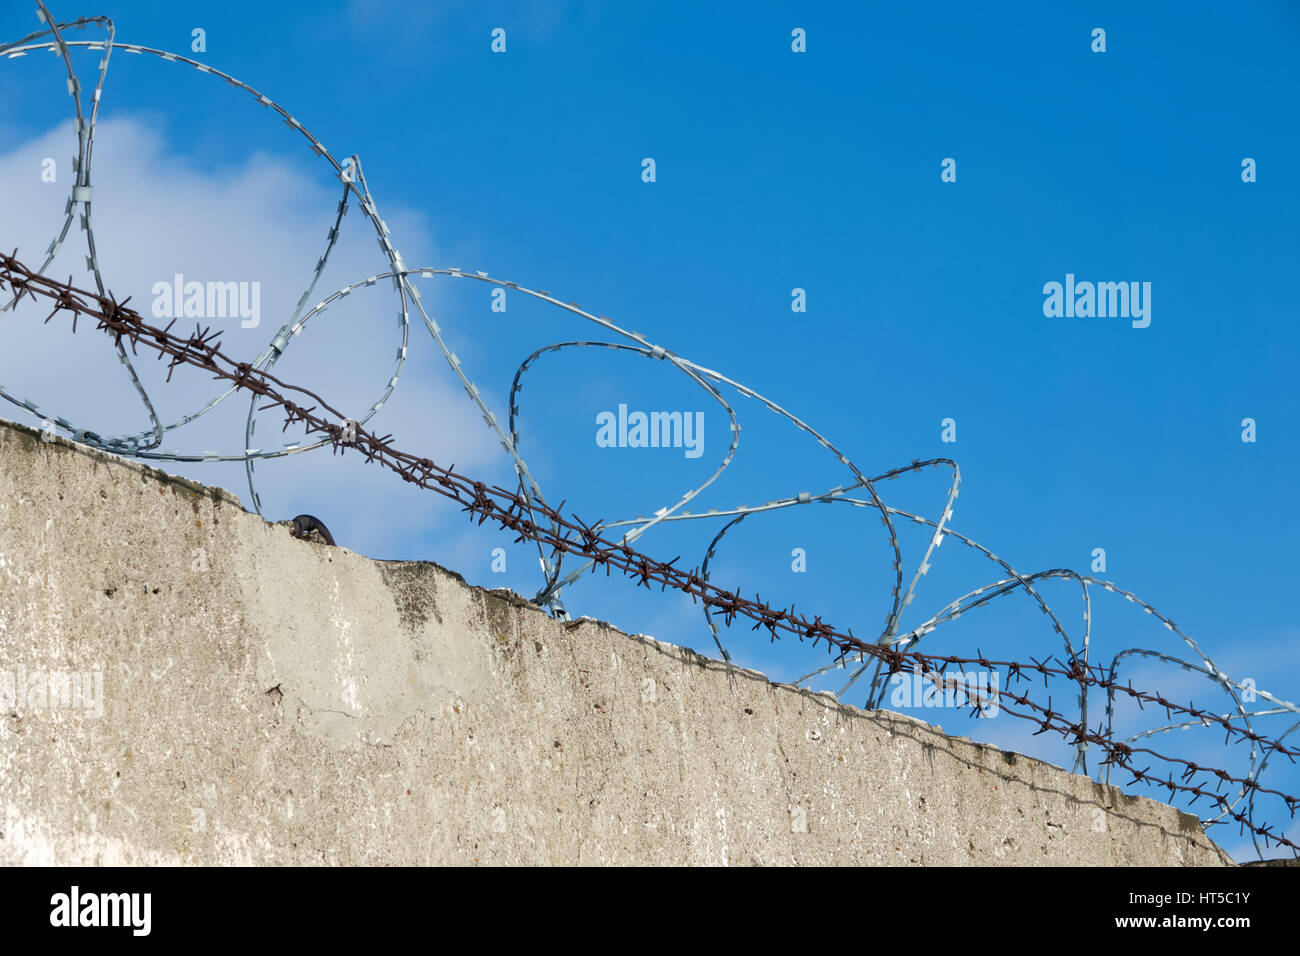 Fence with barbed wire. Blue sky. Clouds Stock Photo